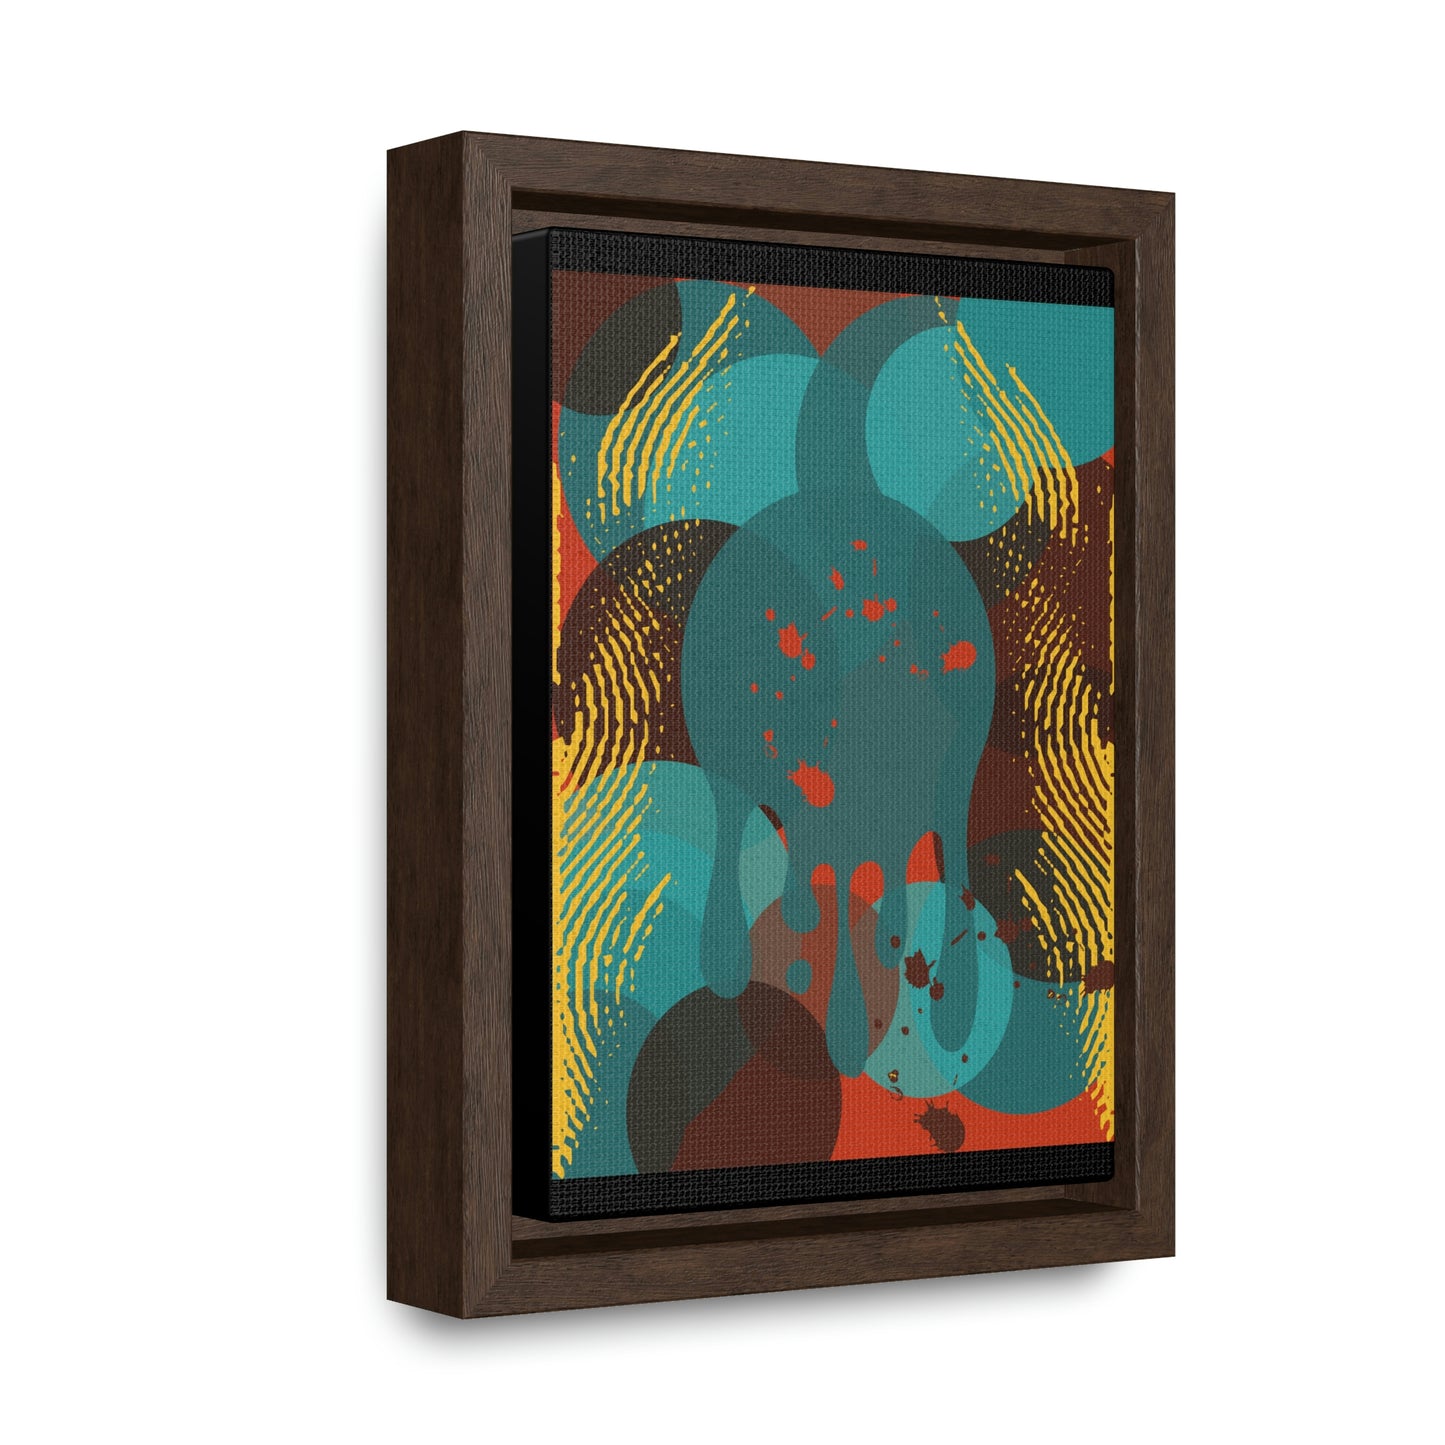 Vertical Framed Premium Gallery Wrap Canvas-Teal Abstract